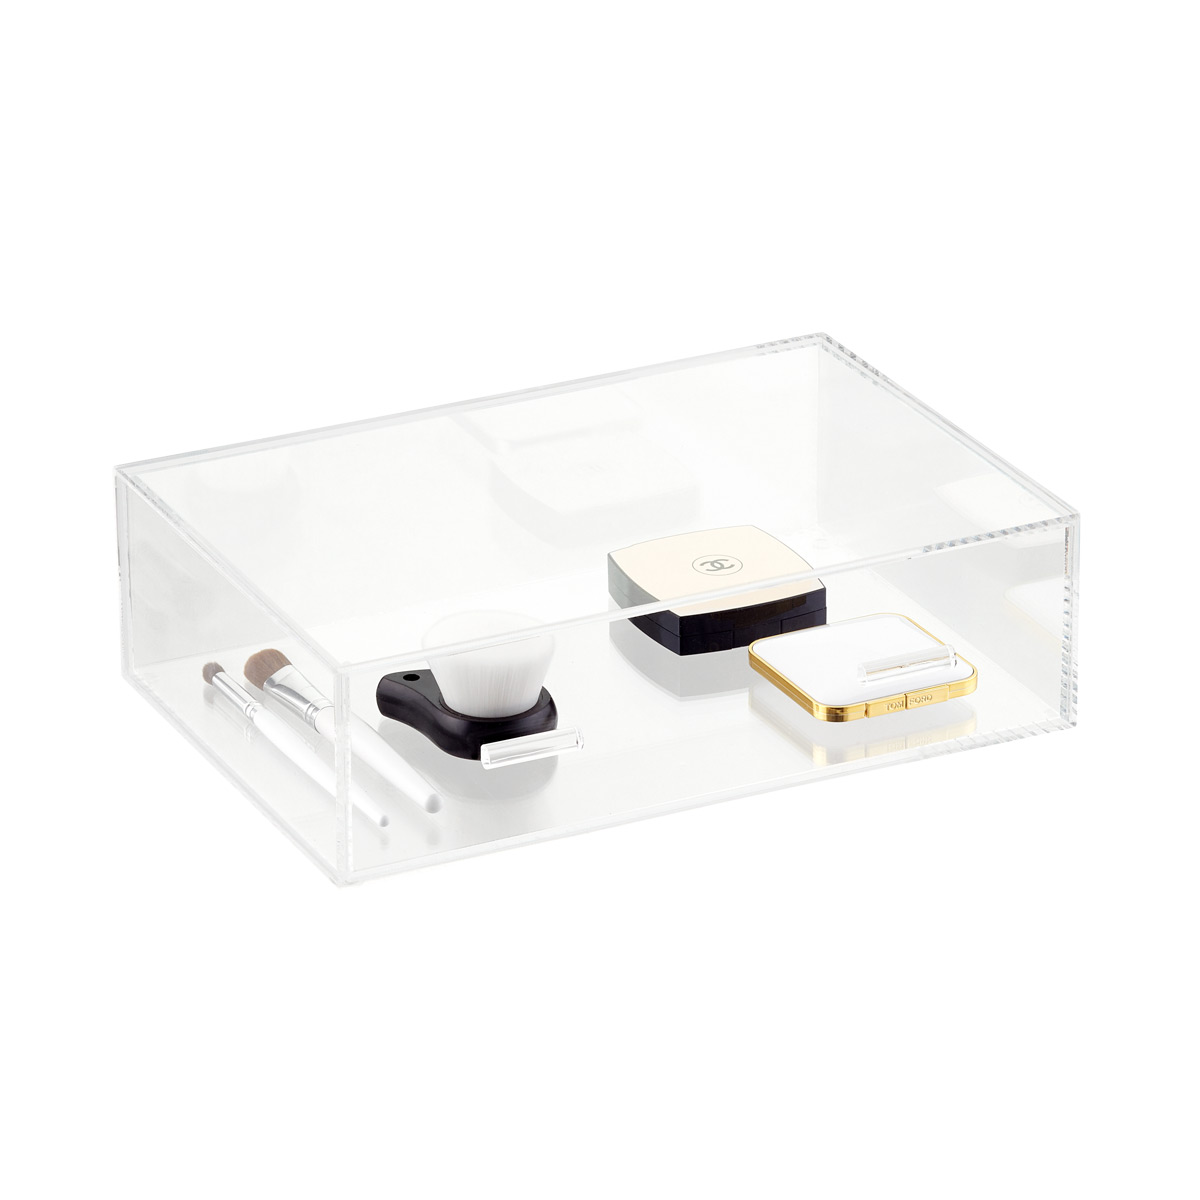 https://www.containerstore.com/catalogimages/321136/10072024-Luxe-acrylic-drawer-large_1.jpg